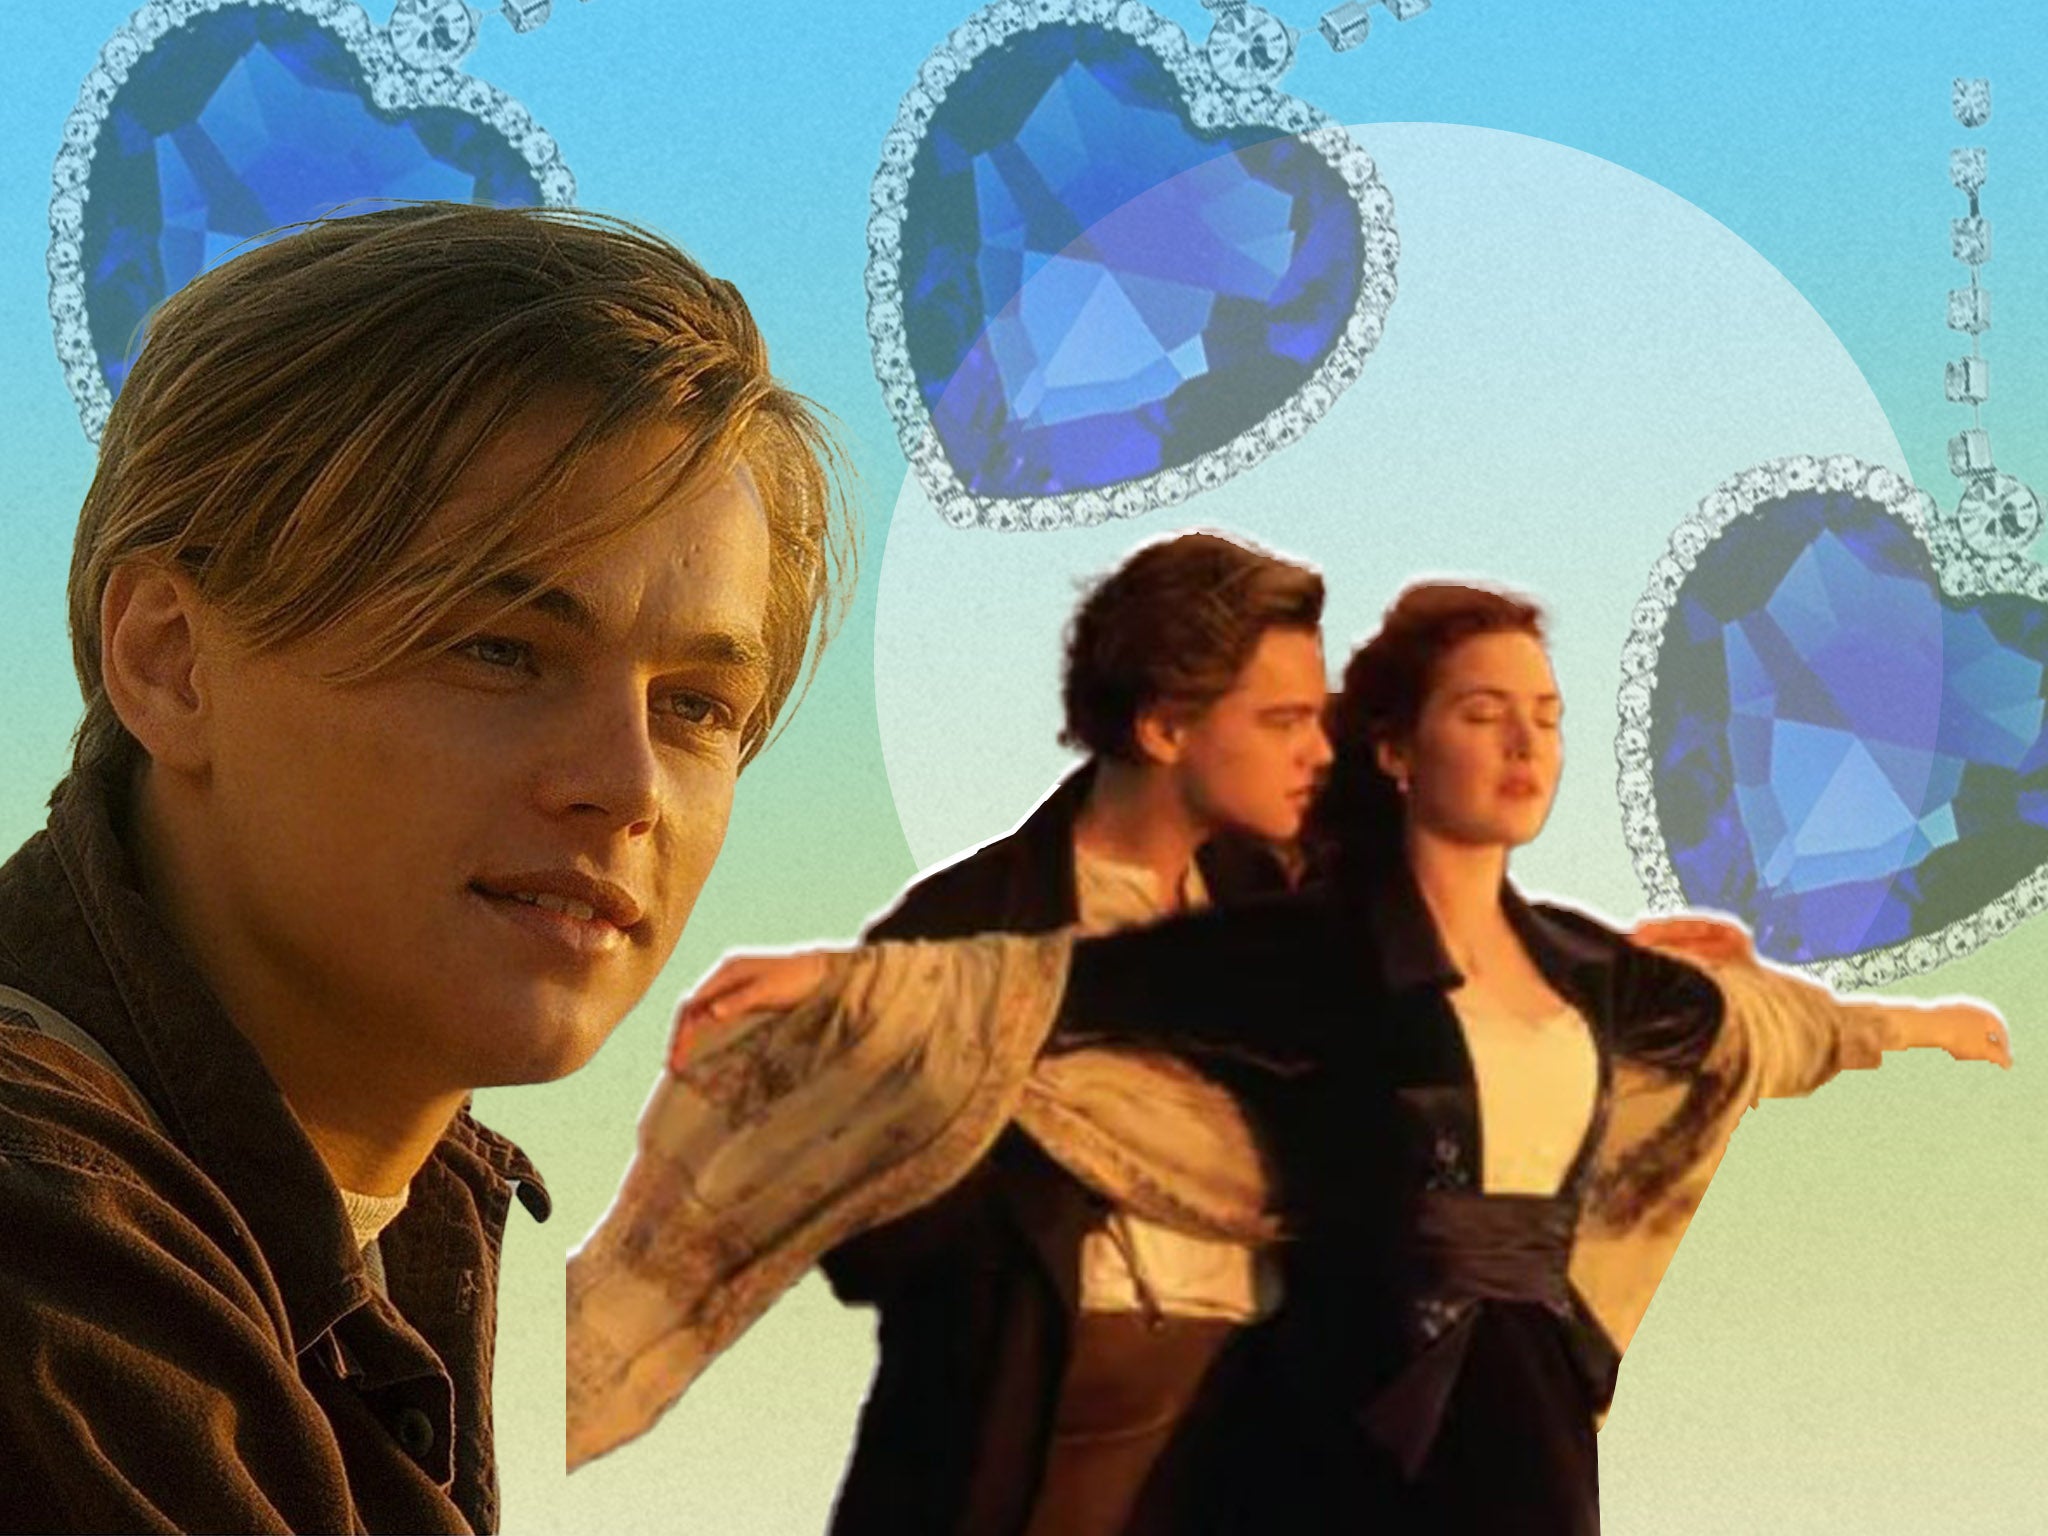 A Titanic Myth: Would Jack Have Survived if Rose Had Shared the